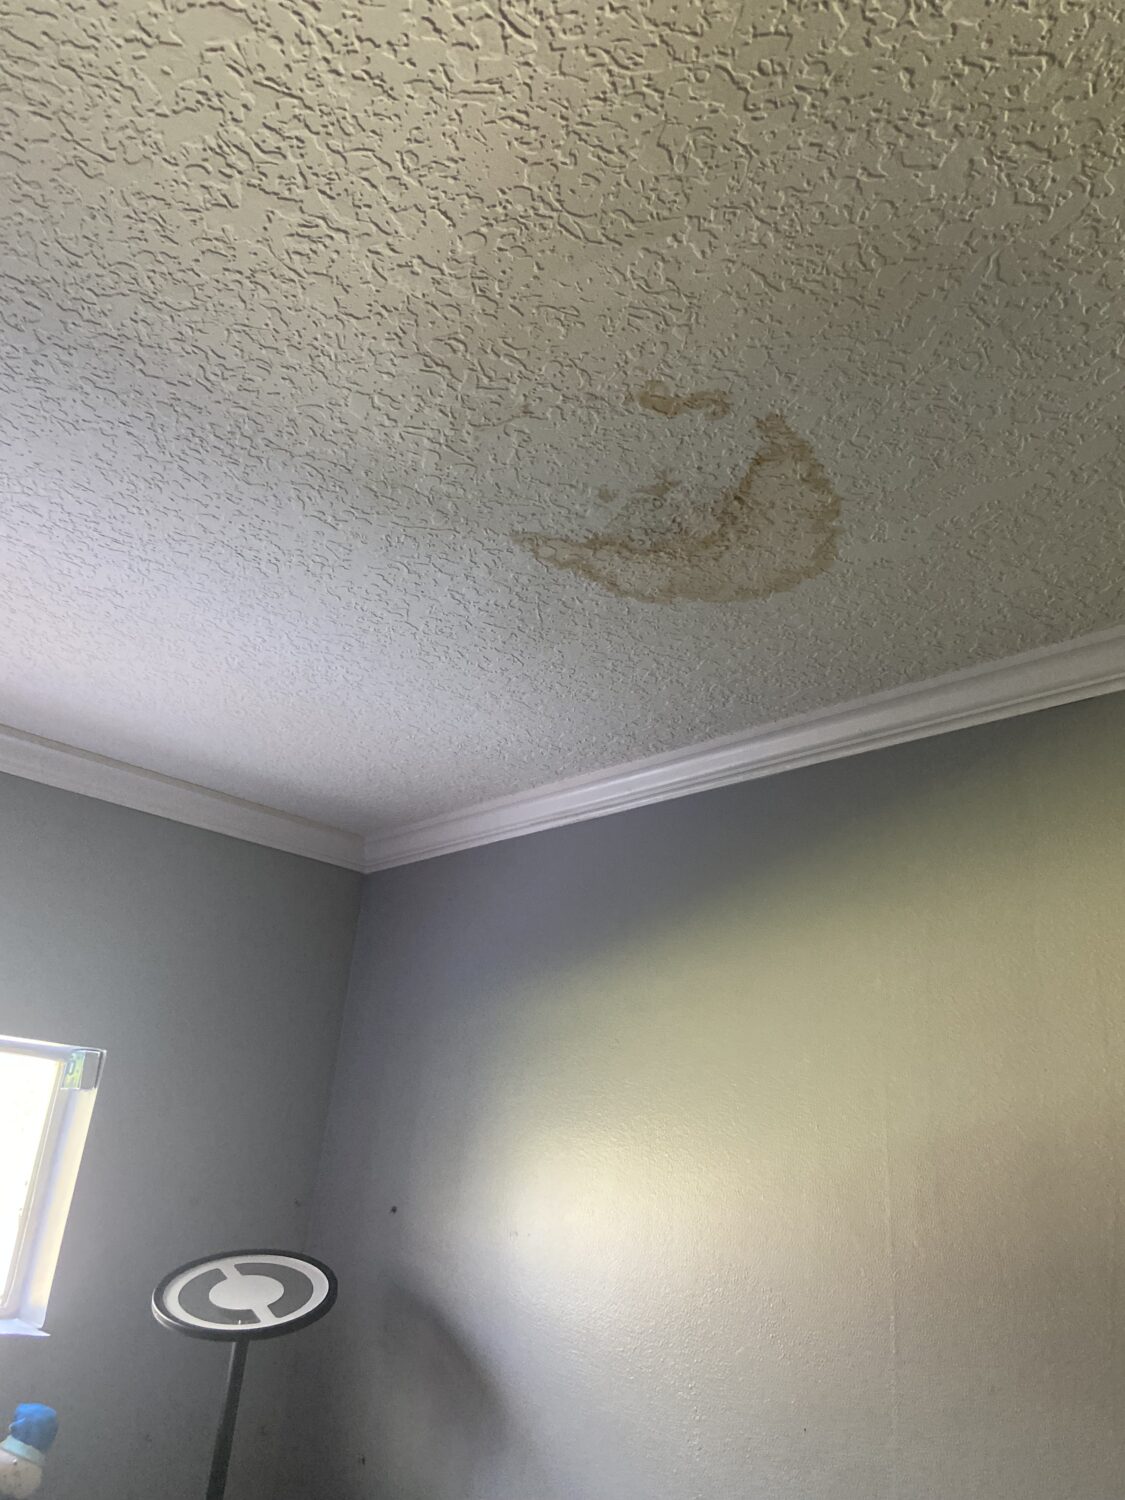 water damage on ceiling due to roof leak